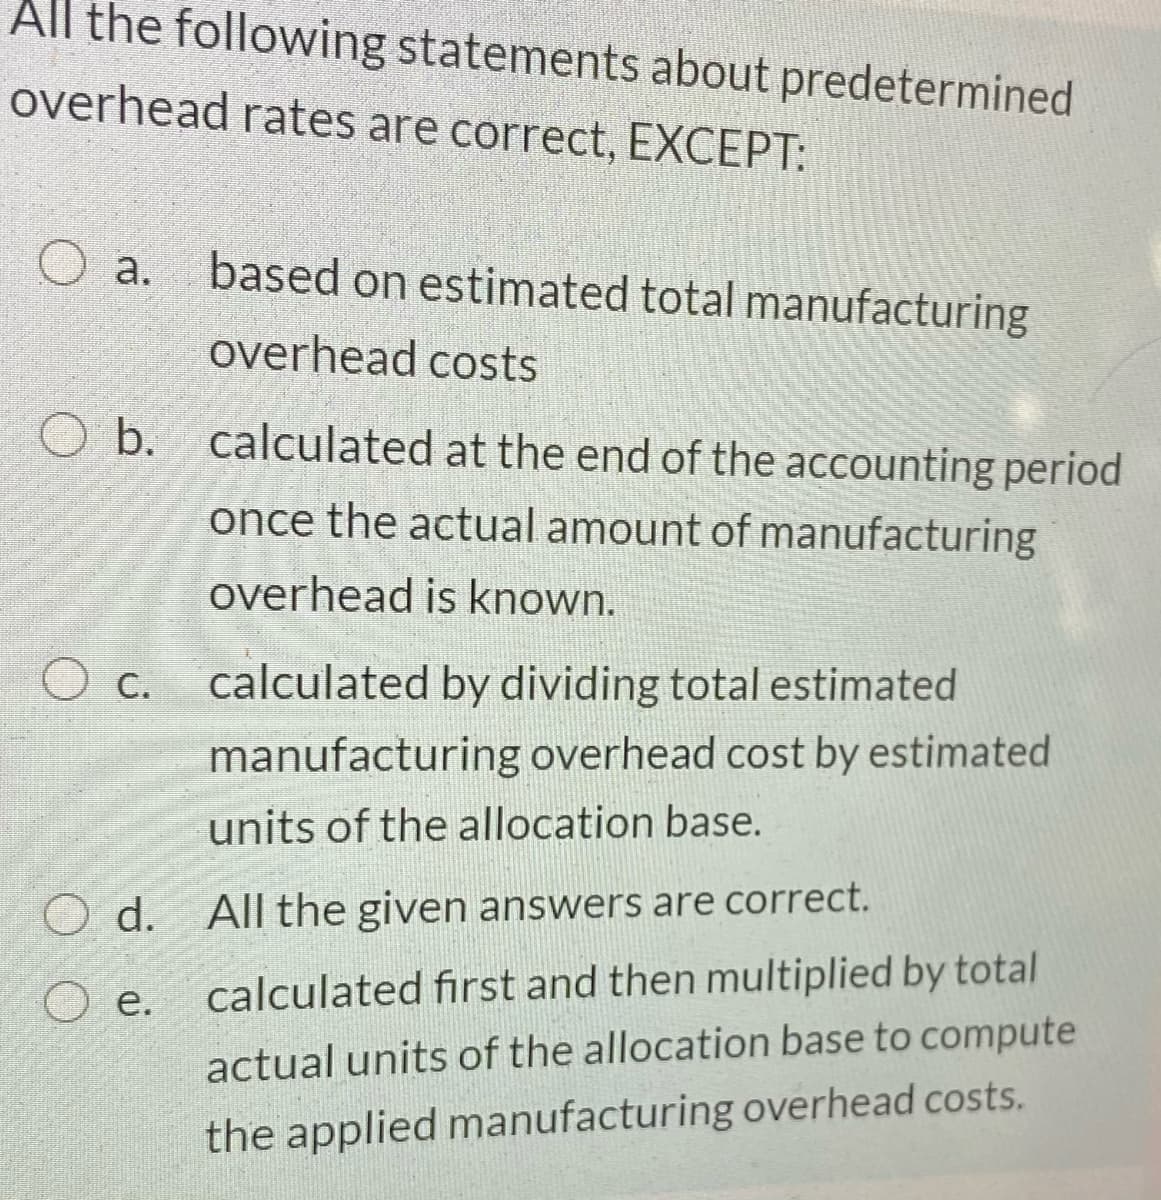 All the following statements about predetermined
overhead rates are correct, EXCEPT:
O a.
based on estimated total manufacturing
overhead costs
O b. calculated at the end of the accounting period
once the actual amount of manufacturing
overhead is known.
O c. calculated by dividing total estimated
manufacturing overhead cost by estimated
units of the allocation base.
d. All the given answers are correct.
е.
calculated first and then multiplied by total
actual units of the allocation base to compute
the applied manufacturing overhead costs.
